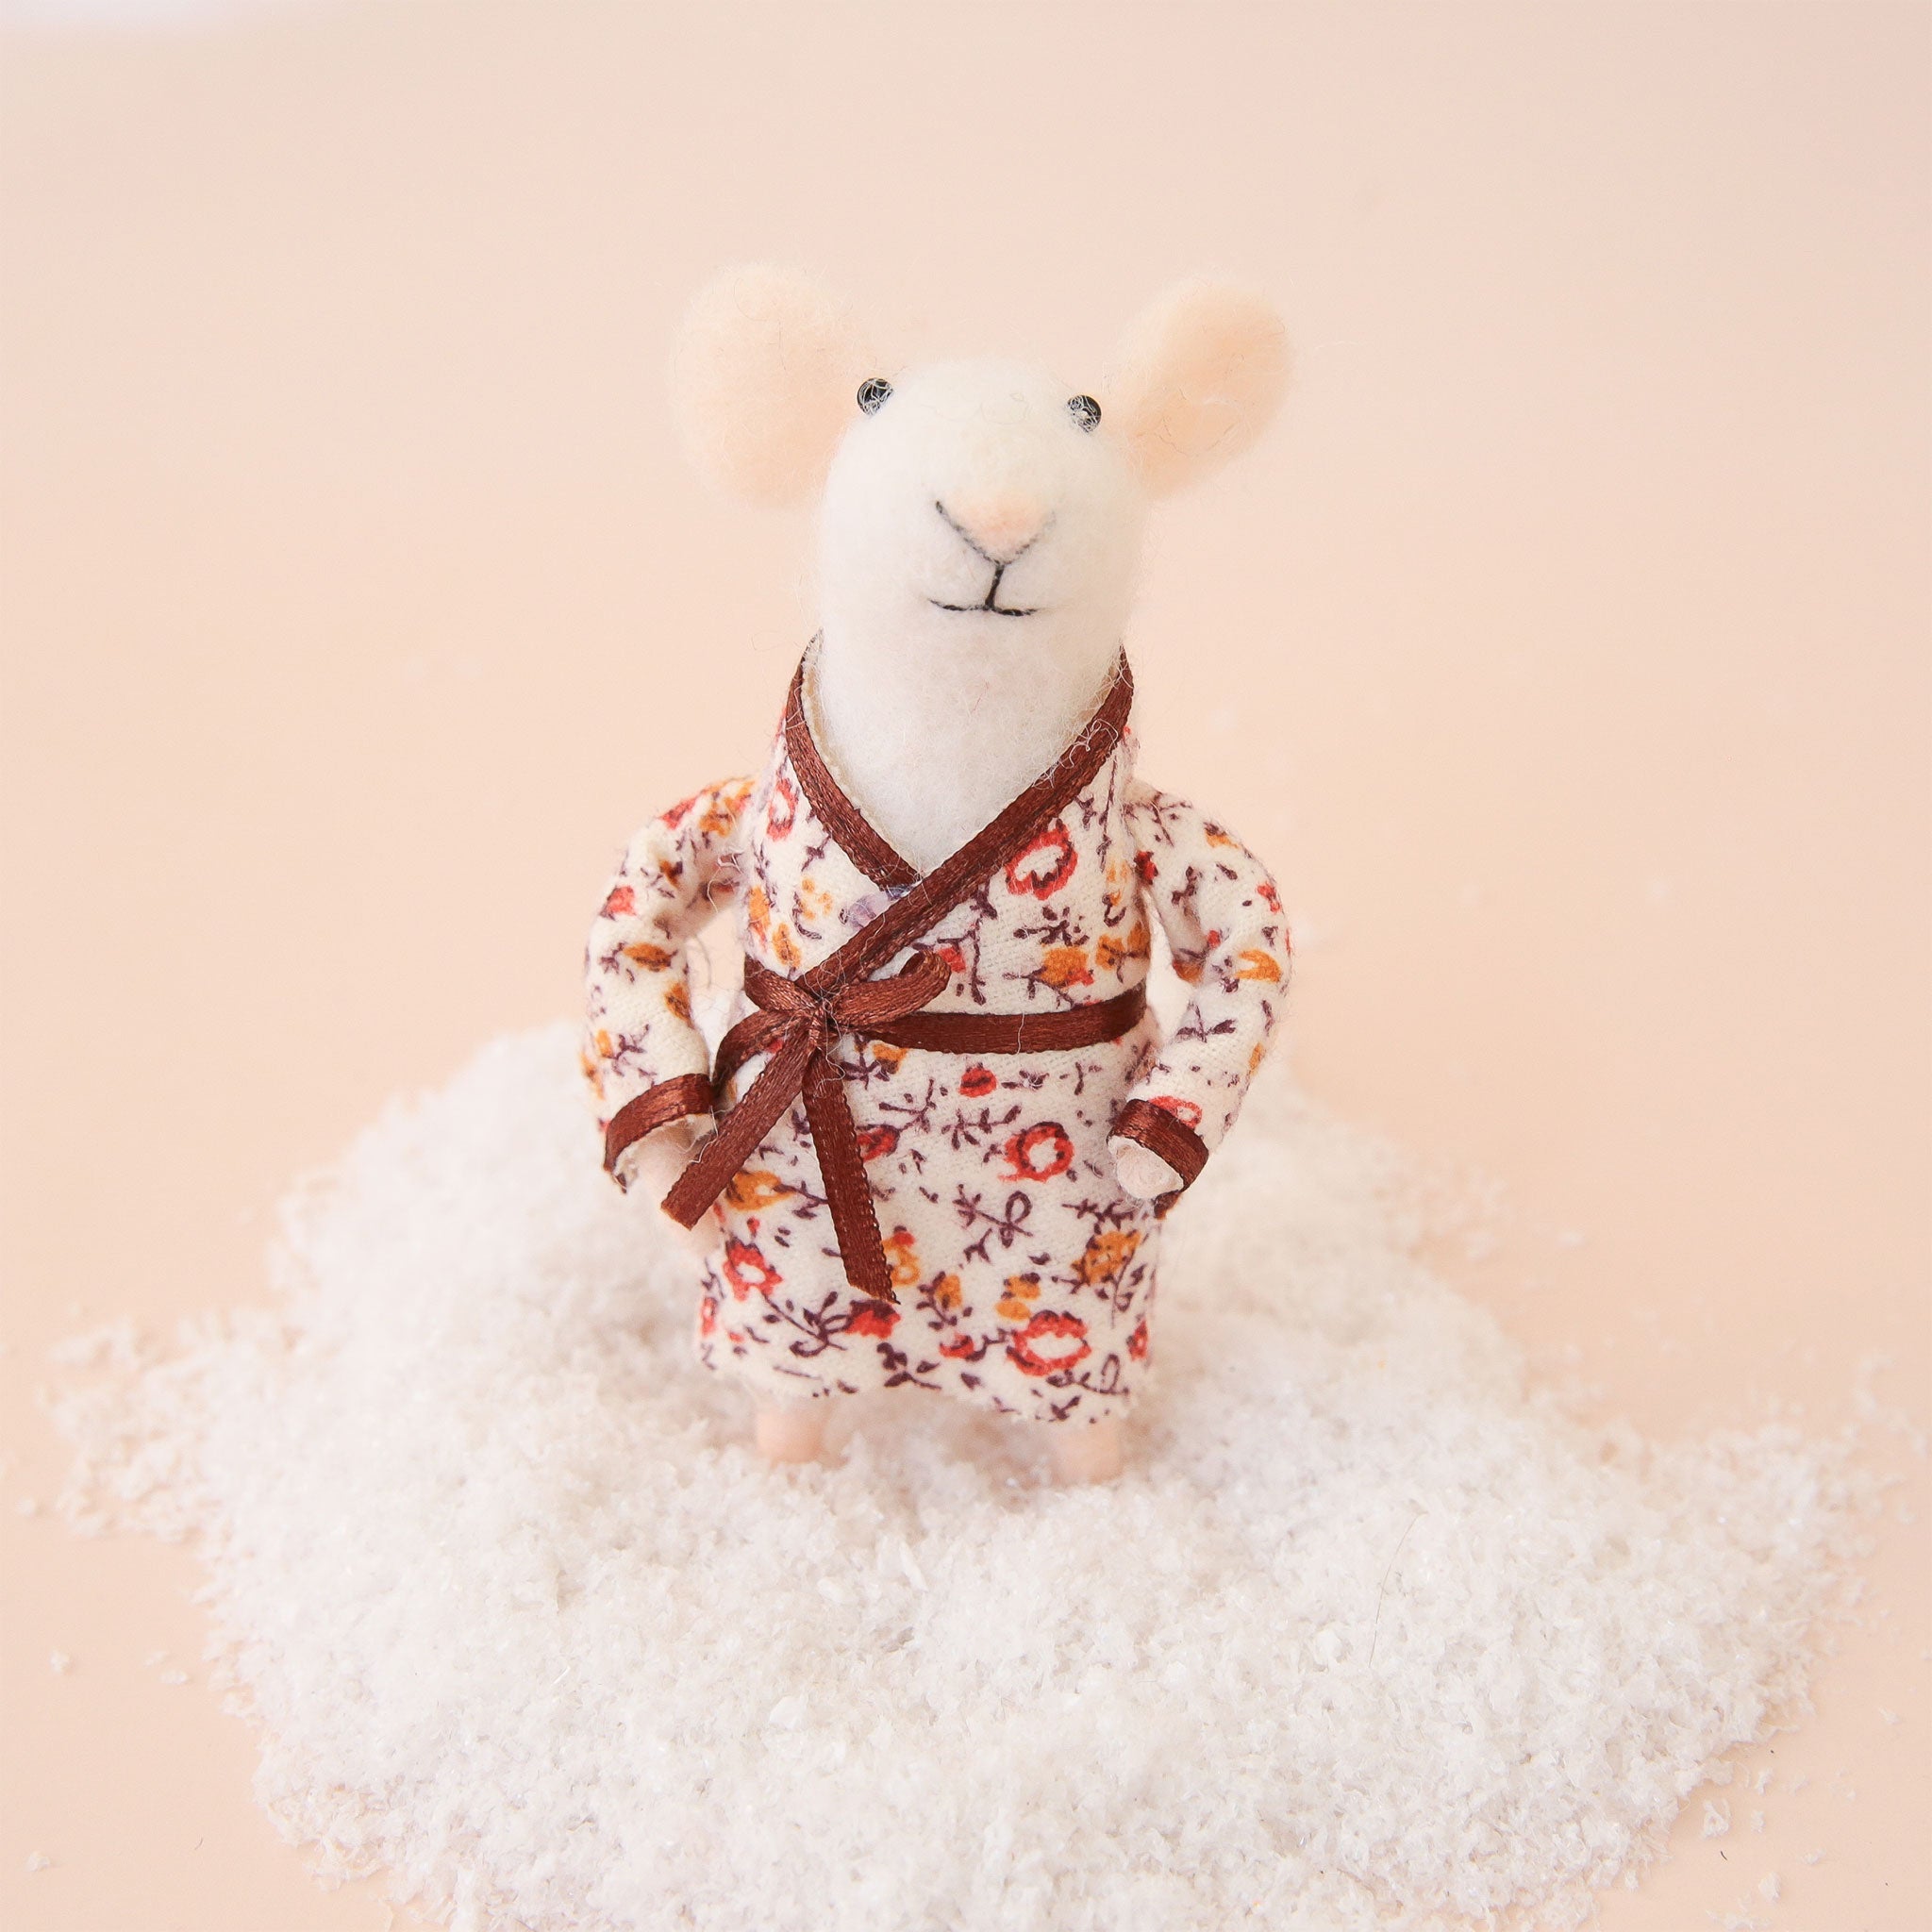 On a peach background is a white felt mouse ornament with a floral pyjama robe on. 